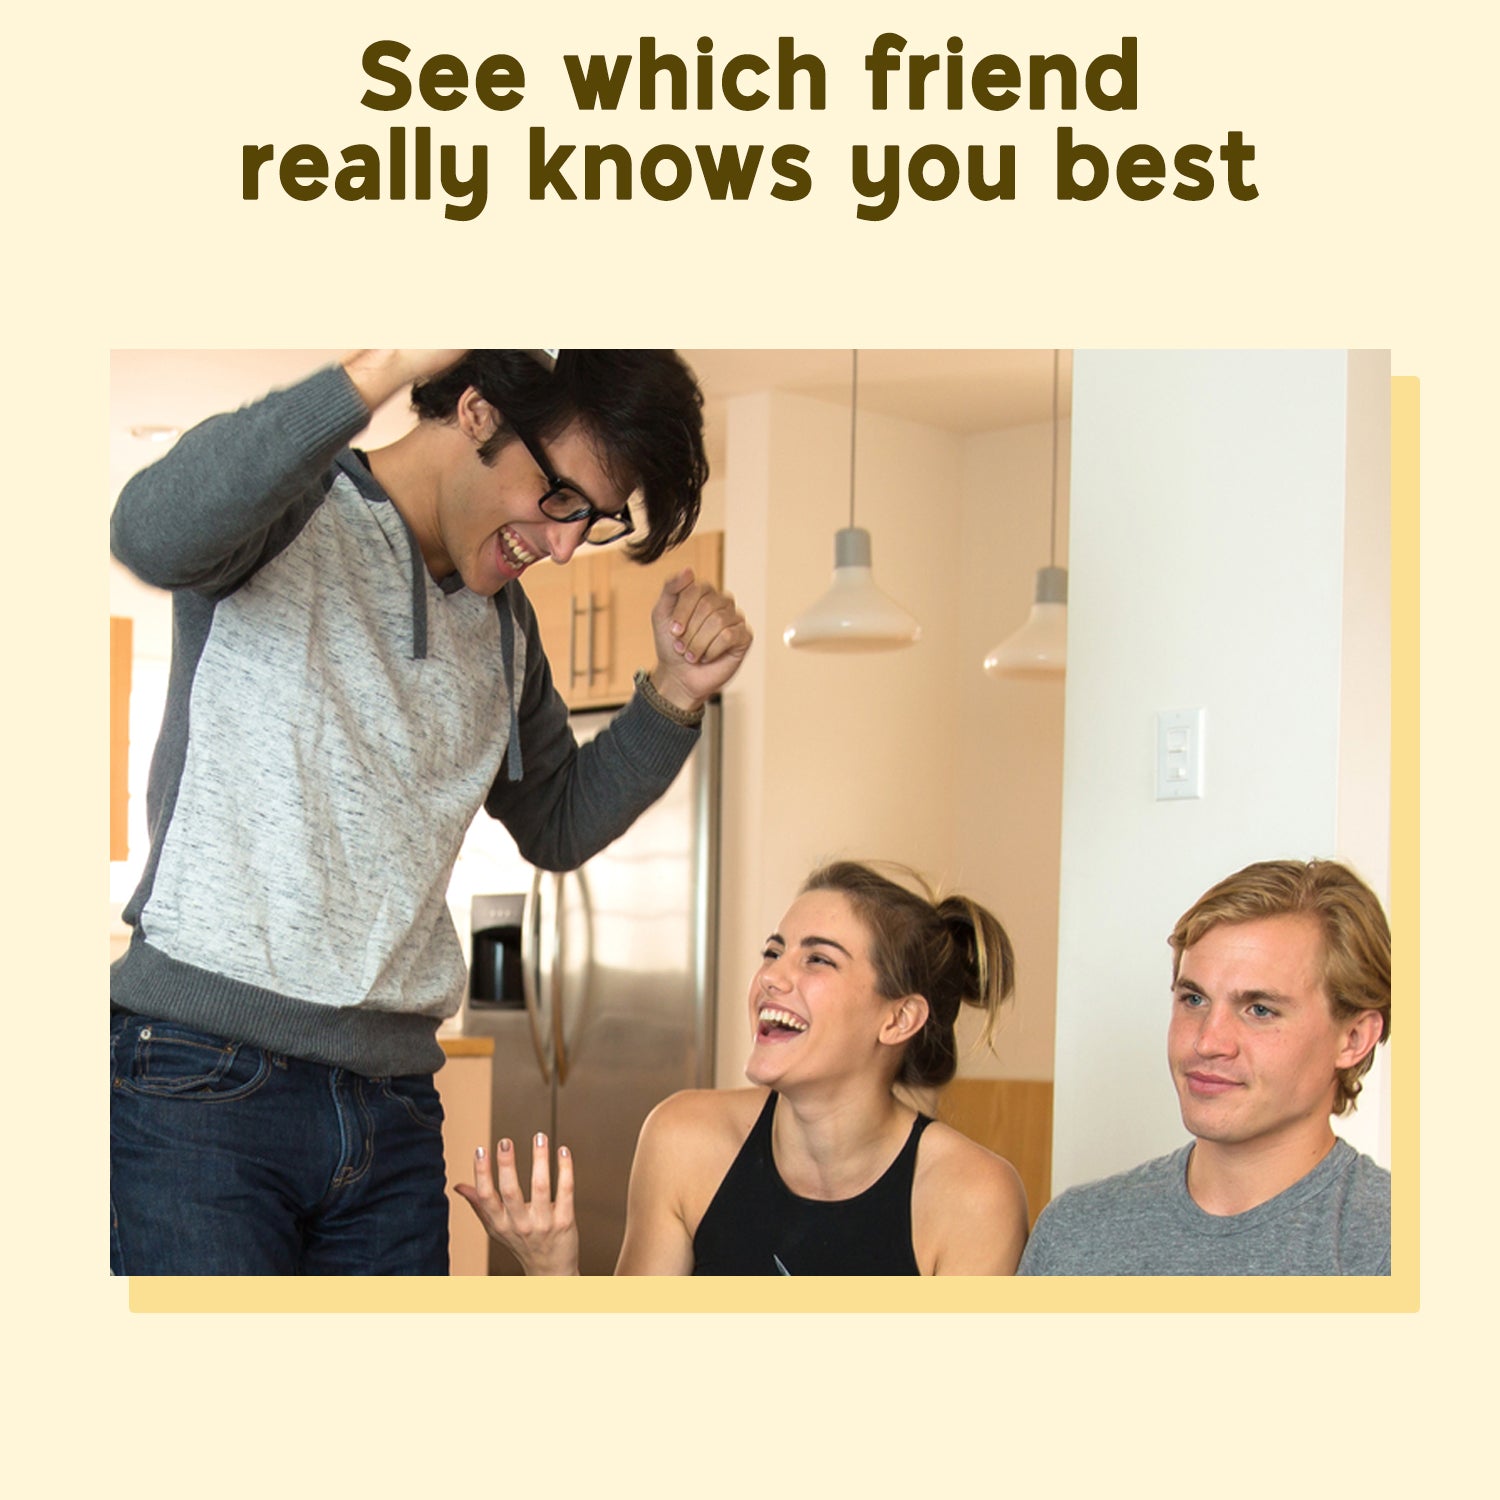 Do You Really Know Your Friends?